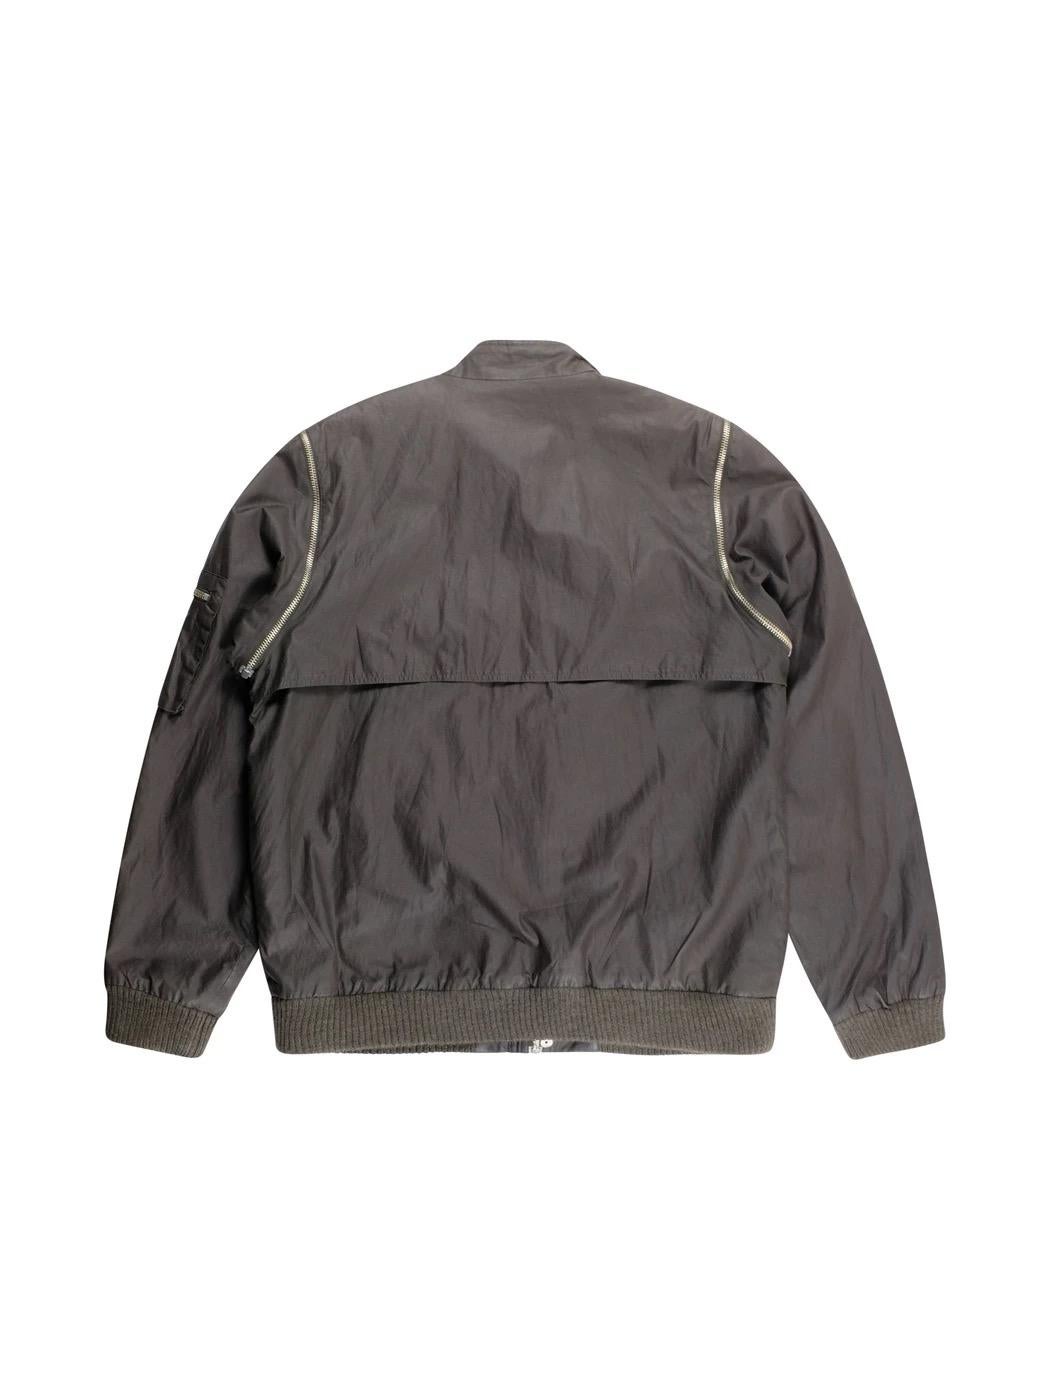 An absolutely legendary release from Raf Simon's AW01 Riot collection comes this very unique flight bomber jacket where the sleeves can zip off. Also features zip front pockets and a snap across the neck in true flight fashion. This is a true